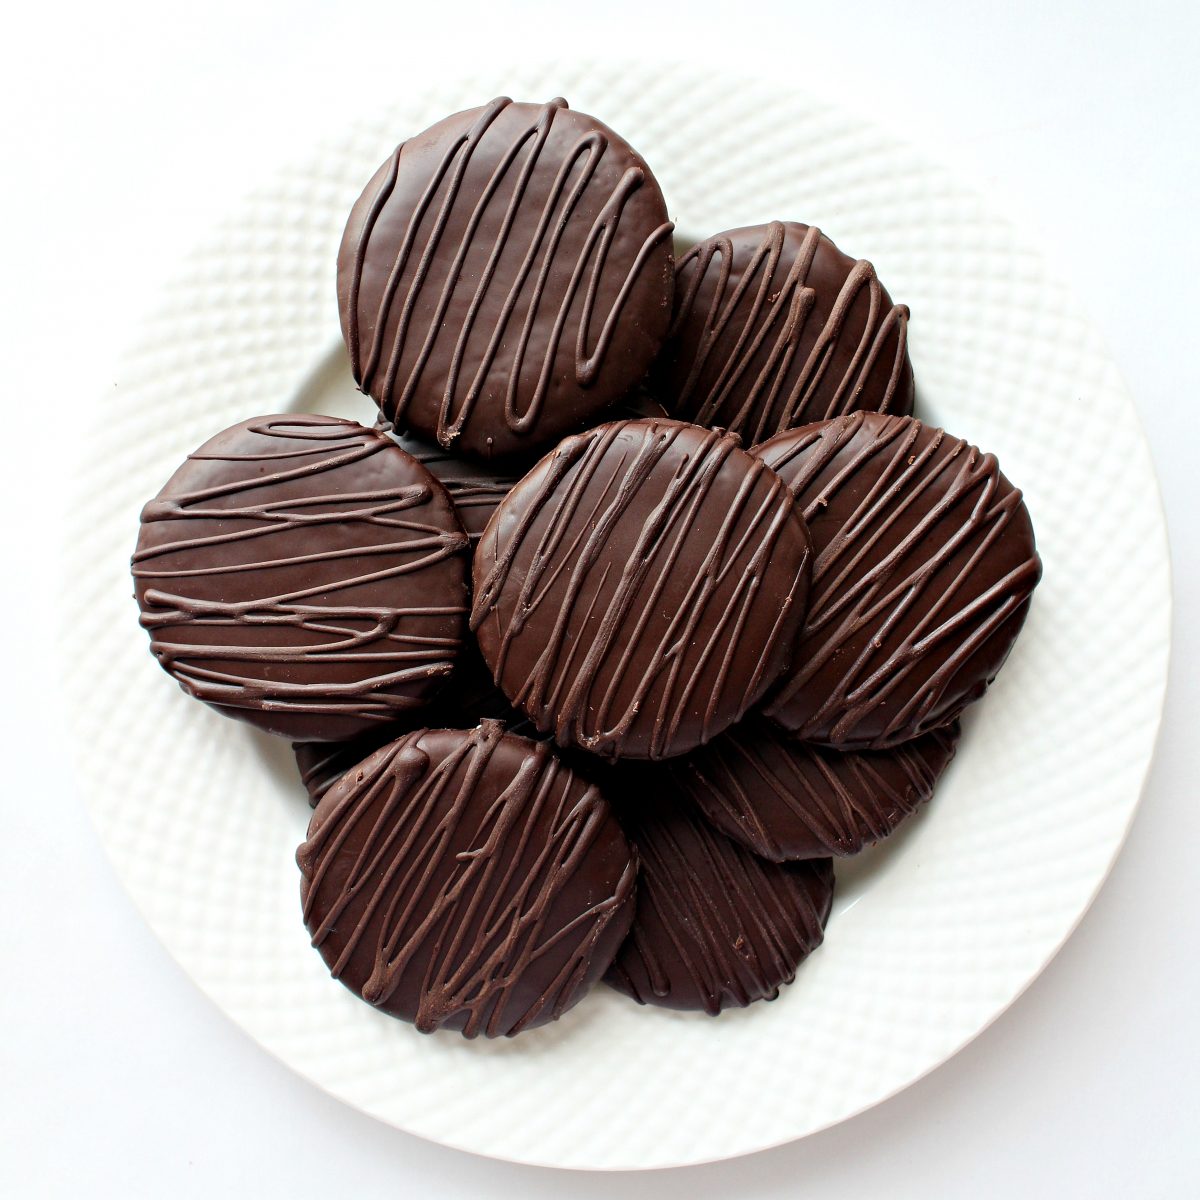 Chocolate covered cookies on a plate.